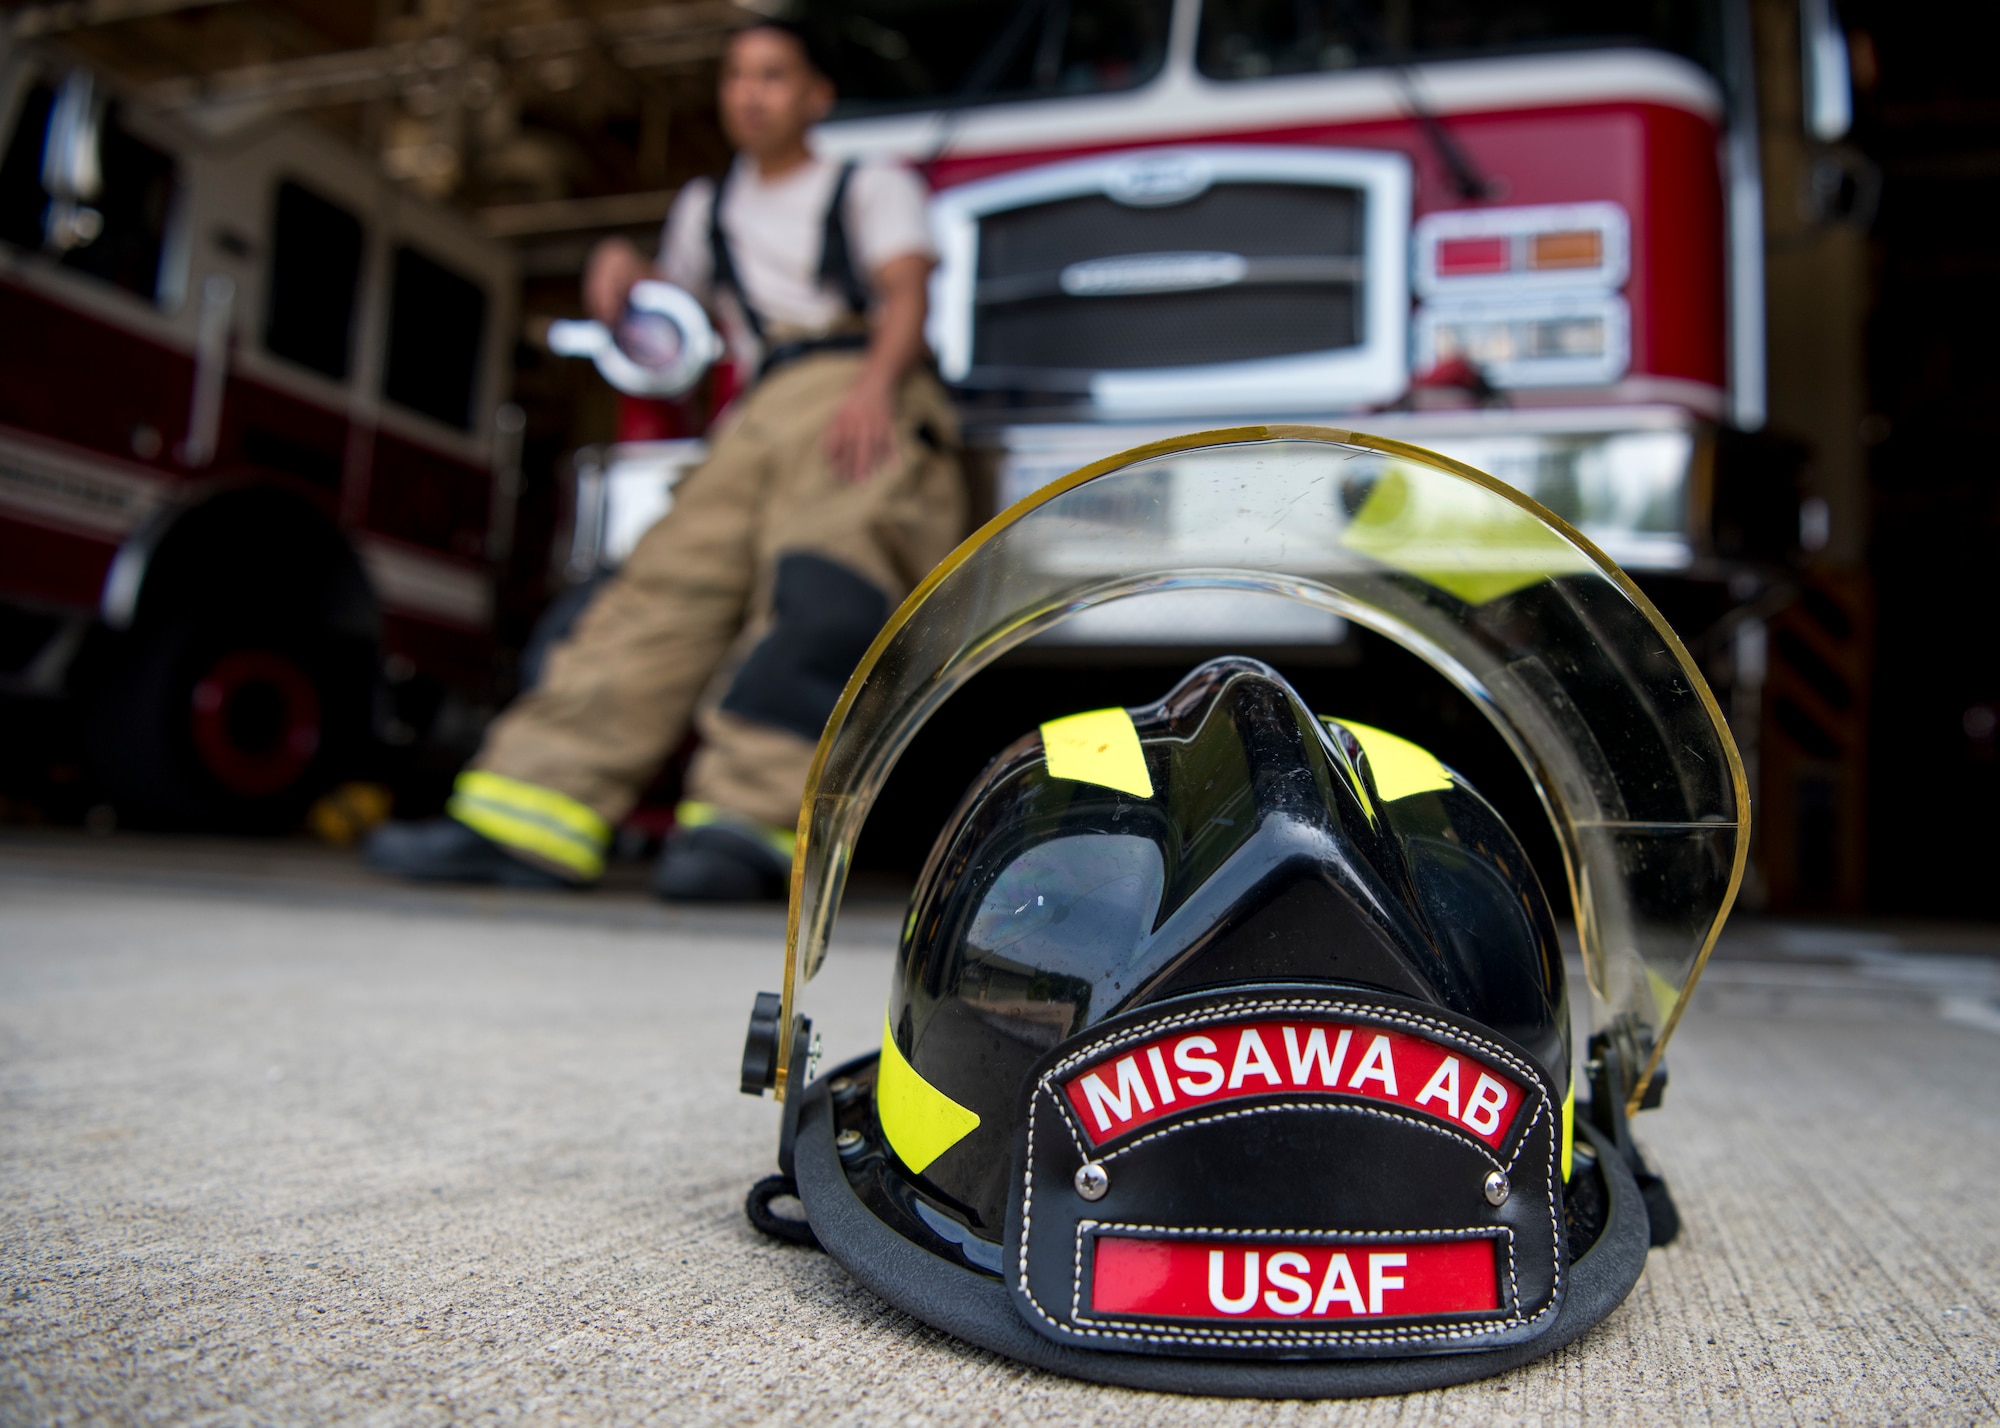 USAF Cardona’s fire protection helmet sits on the ground in front of a fire truck at Misawa Air Base, Japan, Aug. 7, 2019. Cardona expressed Misawa City residents made him instantly feel like a part of the community due to their generosity, kindness and easy going personalities. The demeanor of local Japanese members inspired Cardona to be more humble, understanding and thoughtful when interacting with others. (U.S. Air Force photo by Senior Airman Collette Brooks)